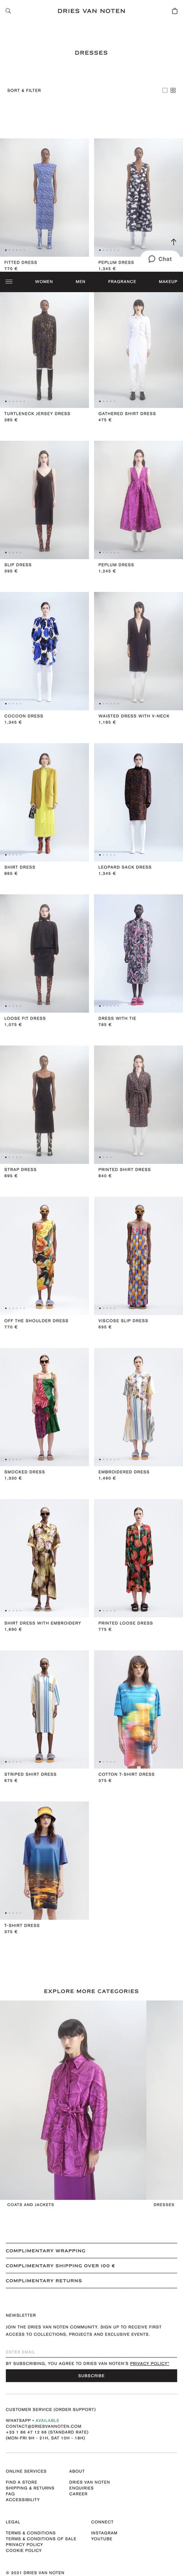 Dries Van Noten - Page Collection - Mobile